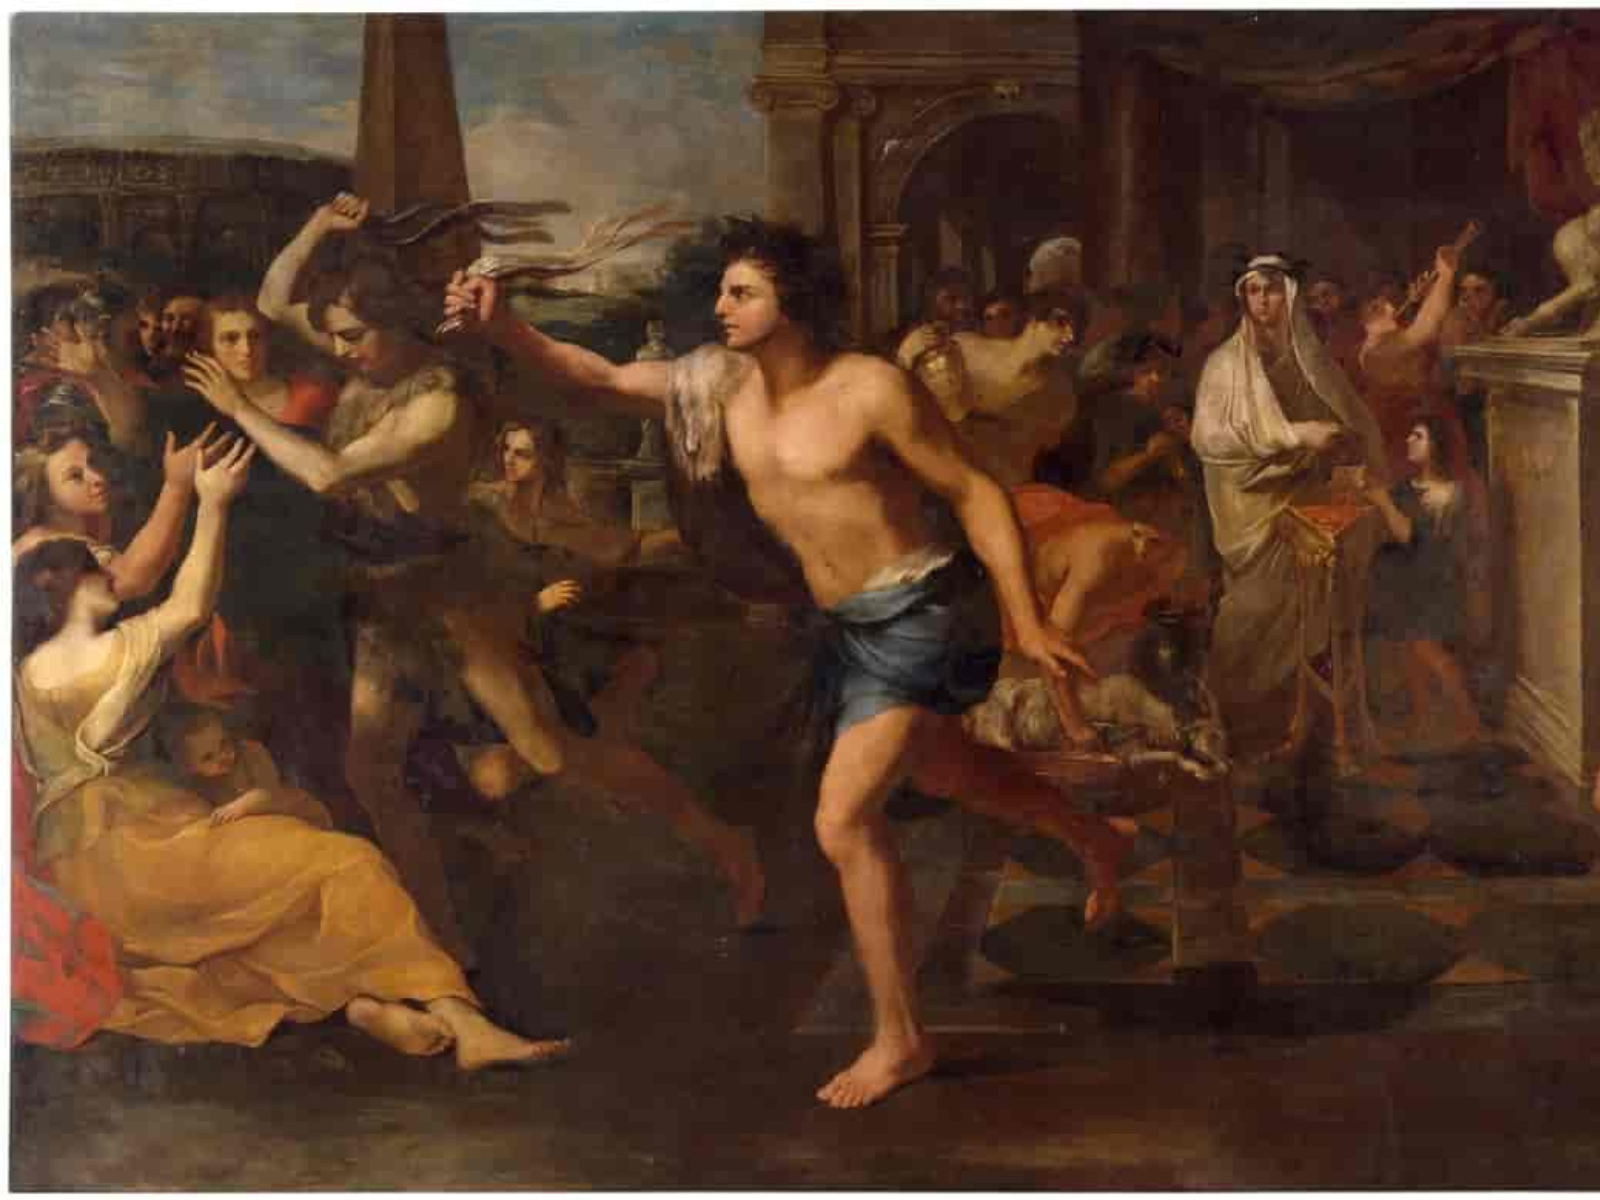 Ancient Roman festival of Lupercalia: a naked youth running on the streets with goat skins